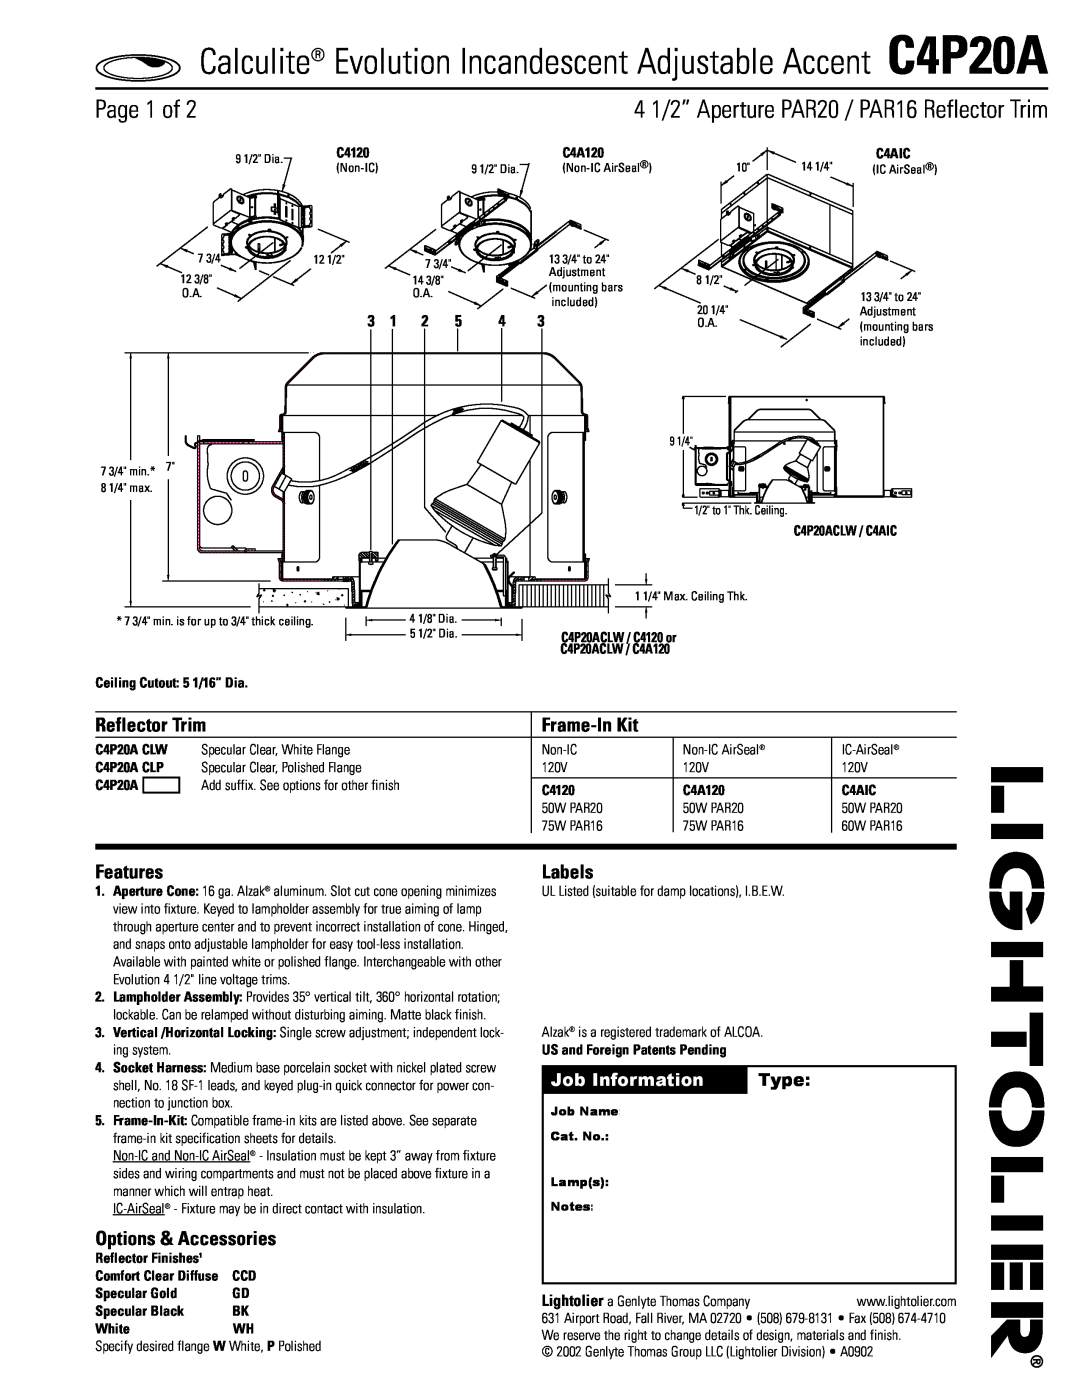 Lightolier C4P20A specifications Page 1 of, Reflector Trim, Frame-InKit, Features, Options & Accessories, Labels, Type 